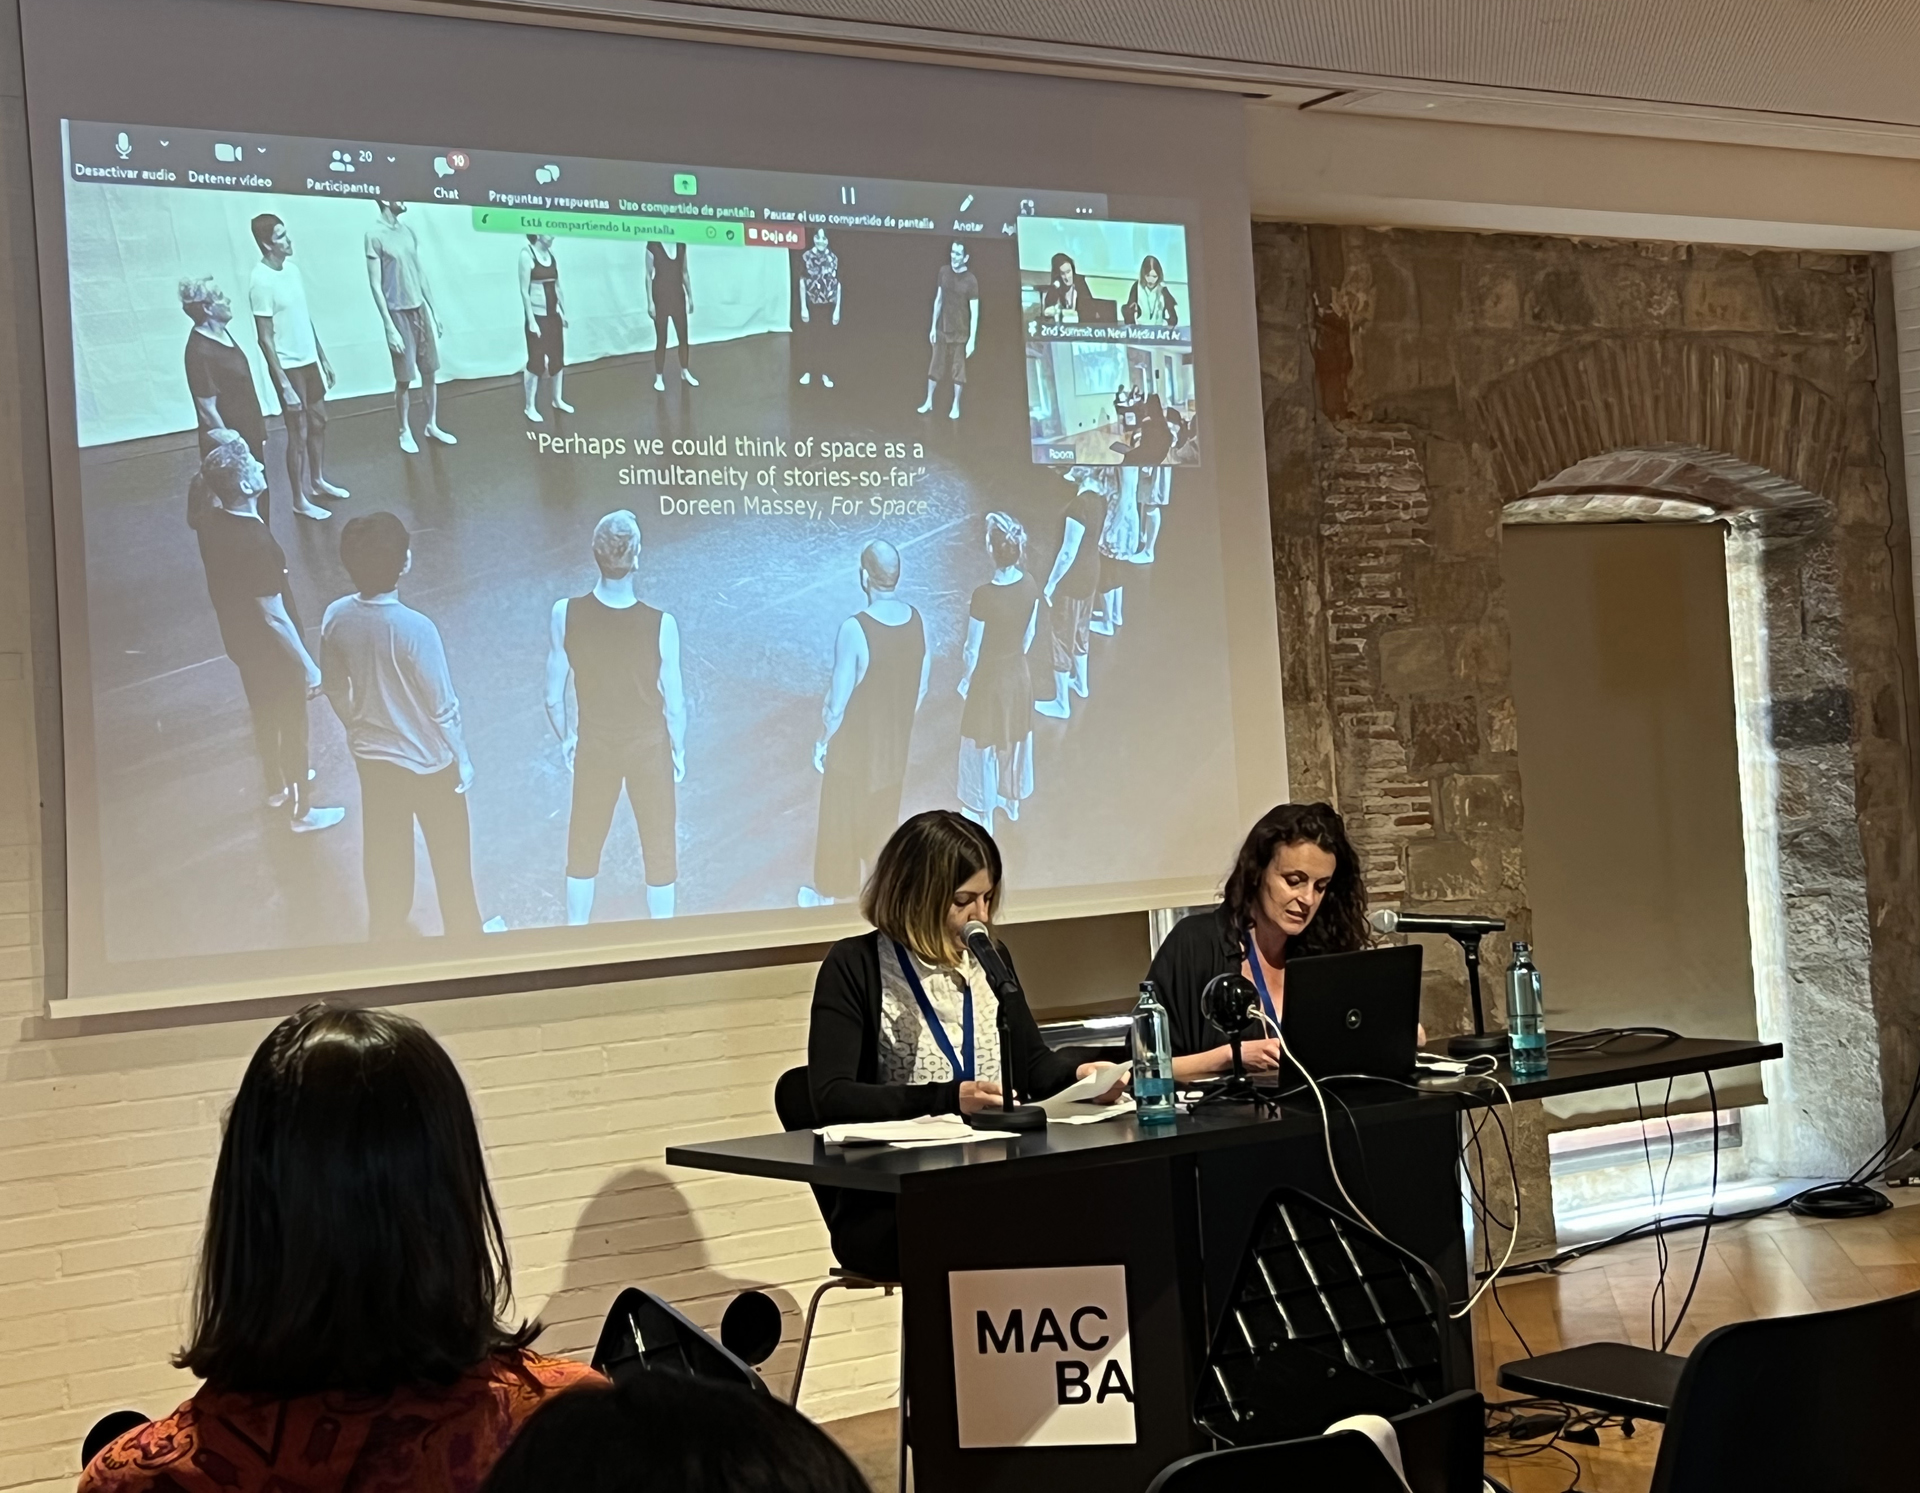 ©ISEA2022: 27th International Symposium on Electronic Art, Adriana La Selva and Ioulia Marouda, Practicing Odin Teatret’s Archives: Virtual Translations of Embodied Knowledge Through Archival Practices